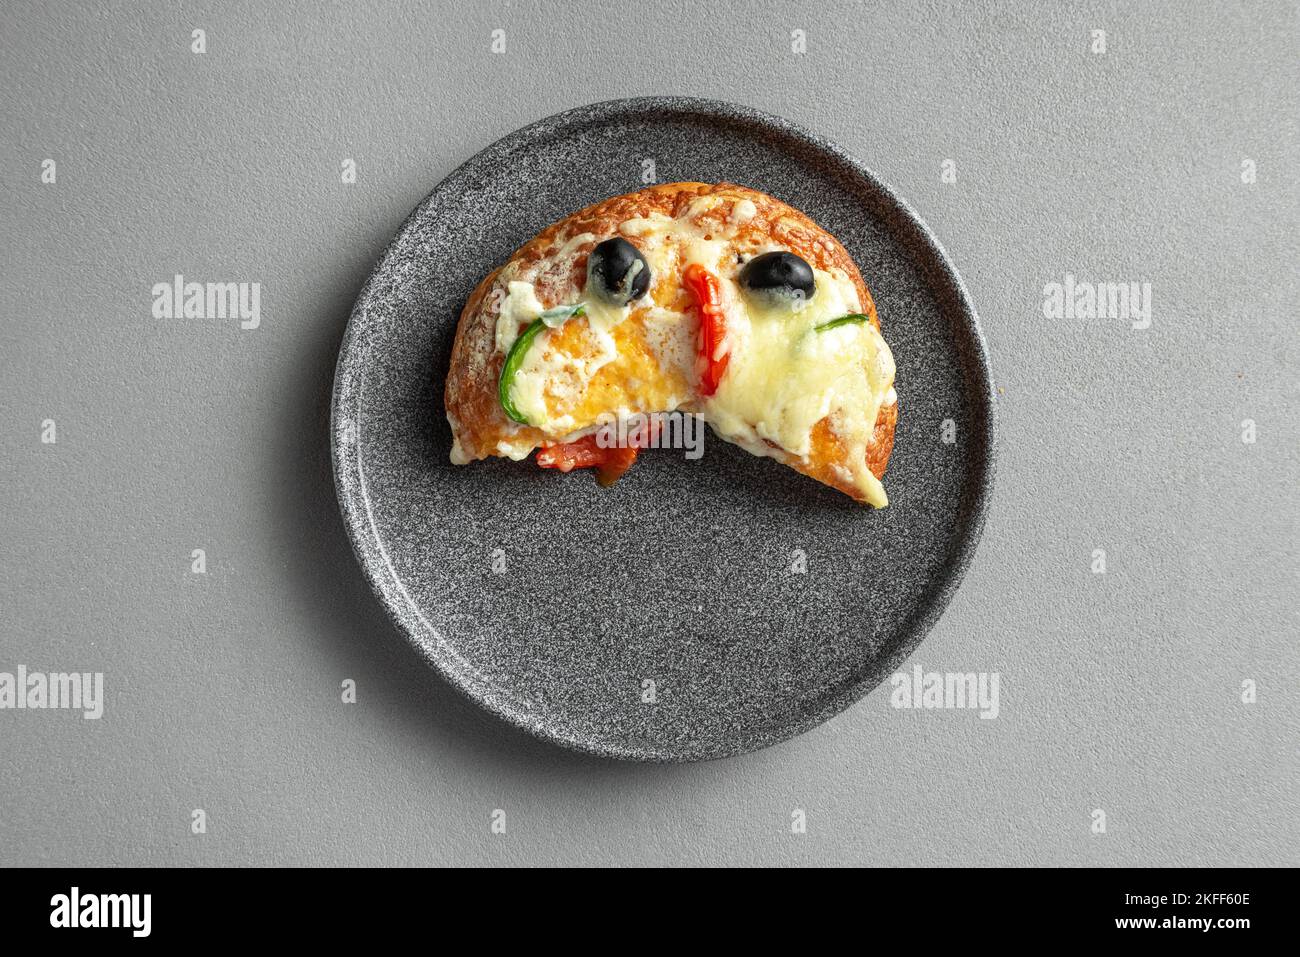 Slice of Indian pizza on a plate on a gray background Stock Photo